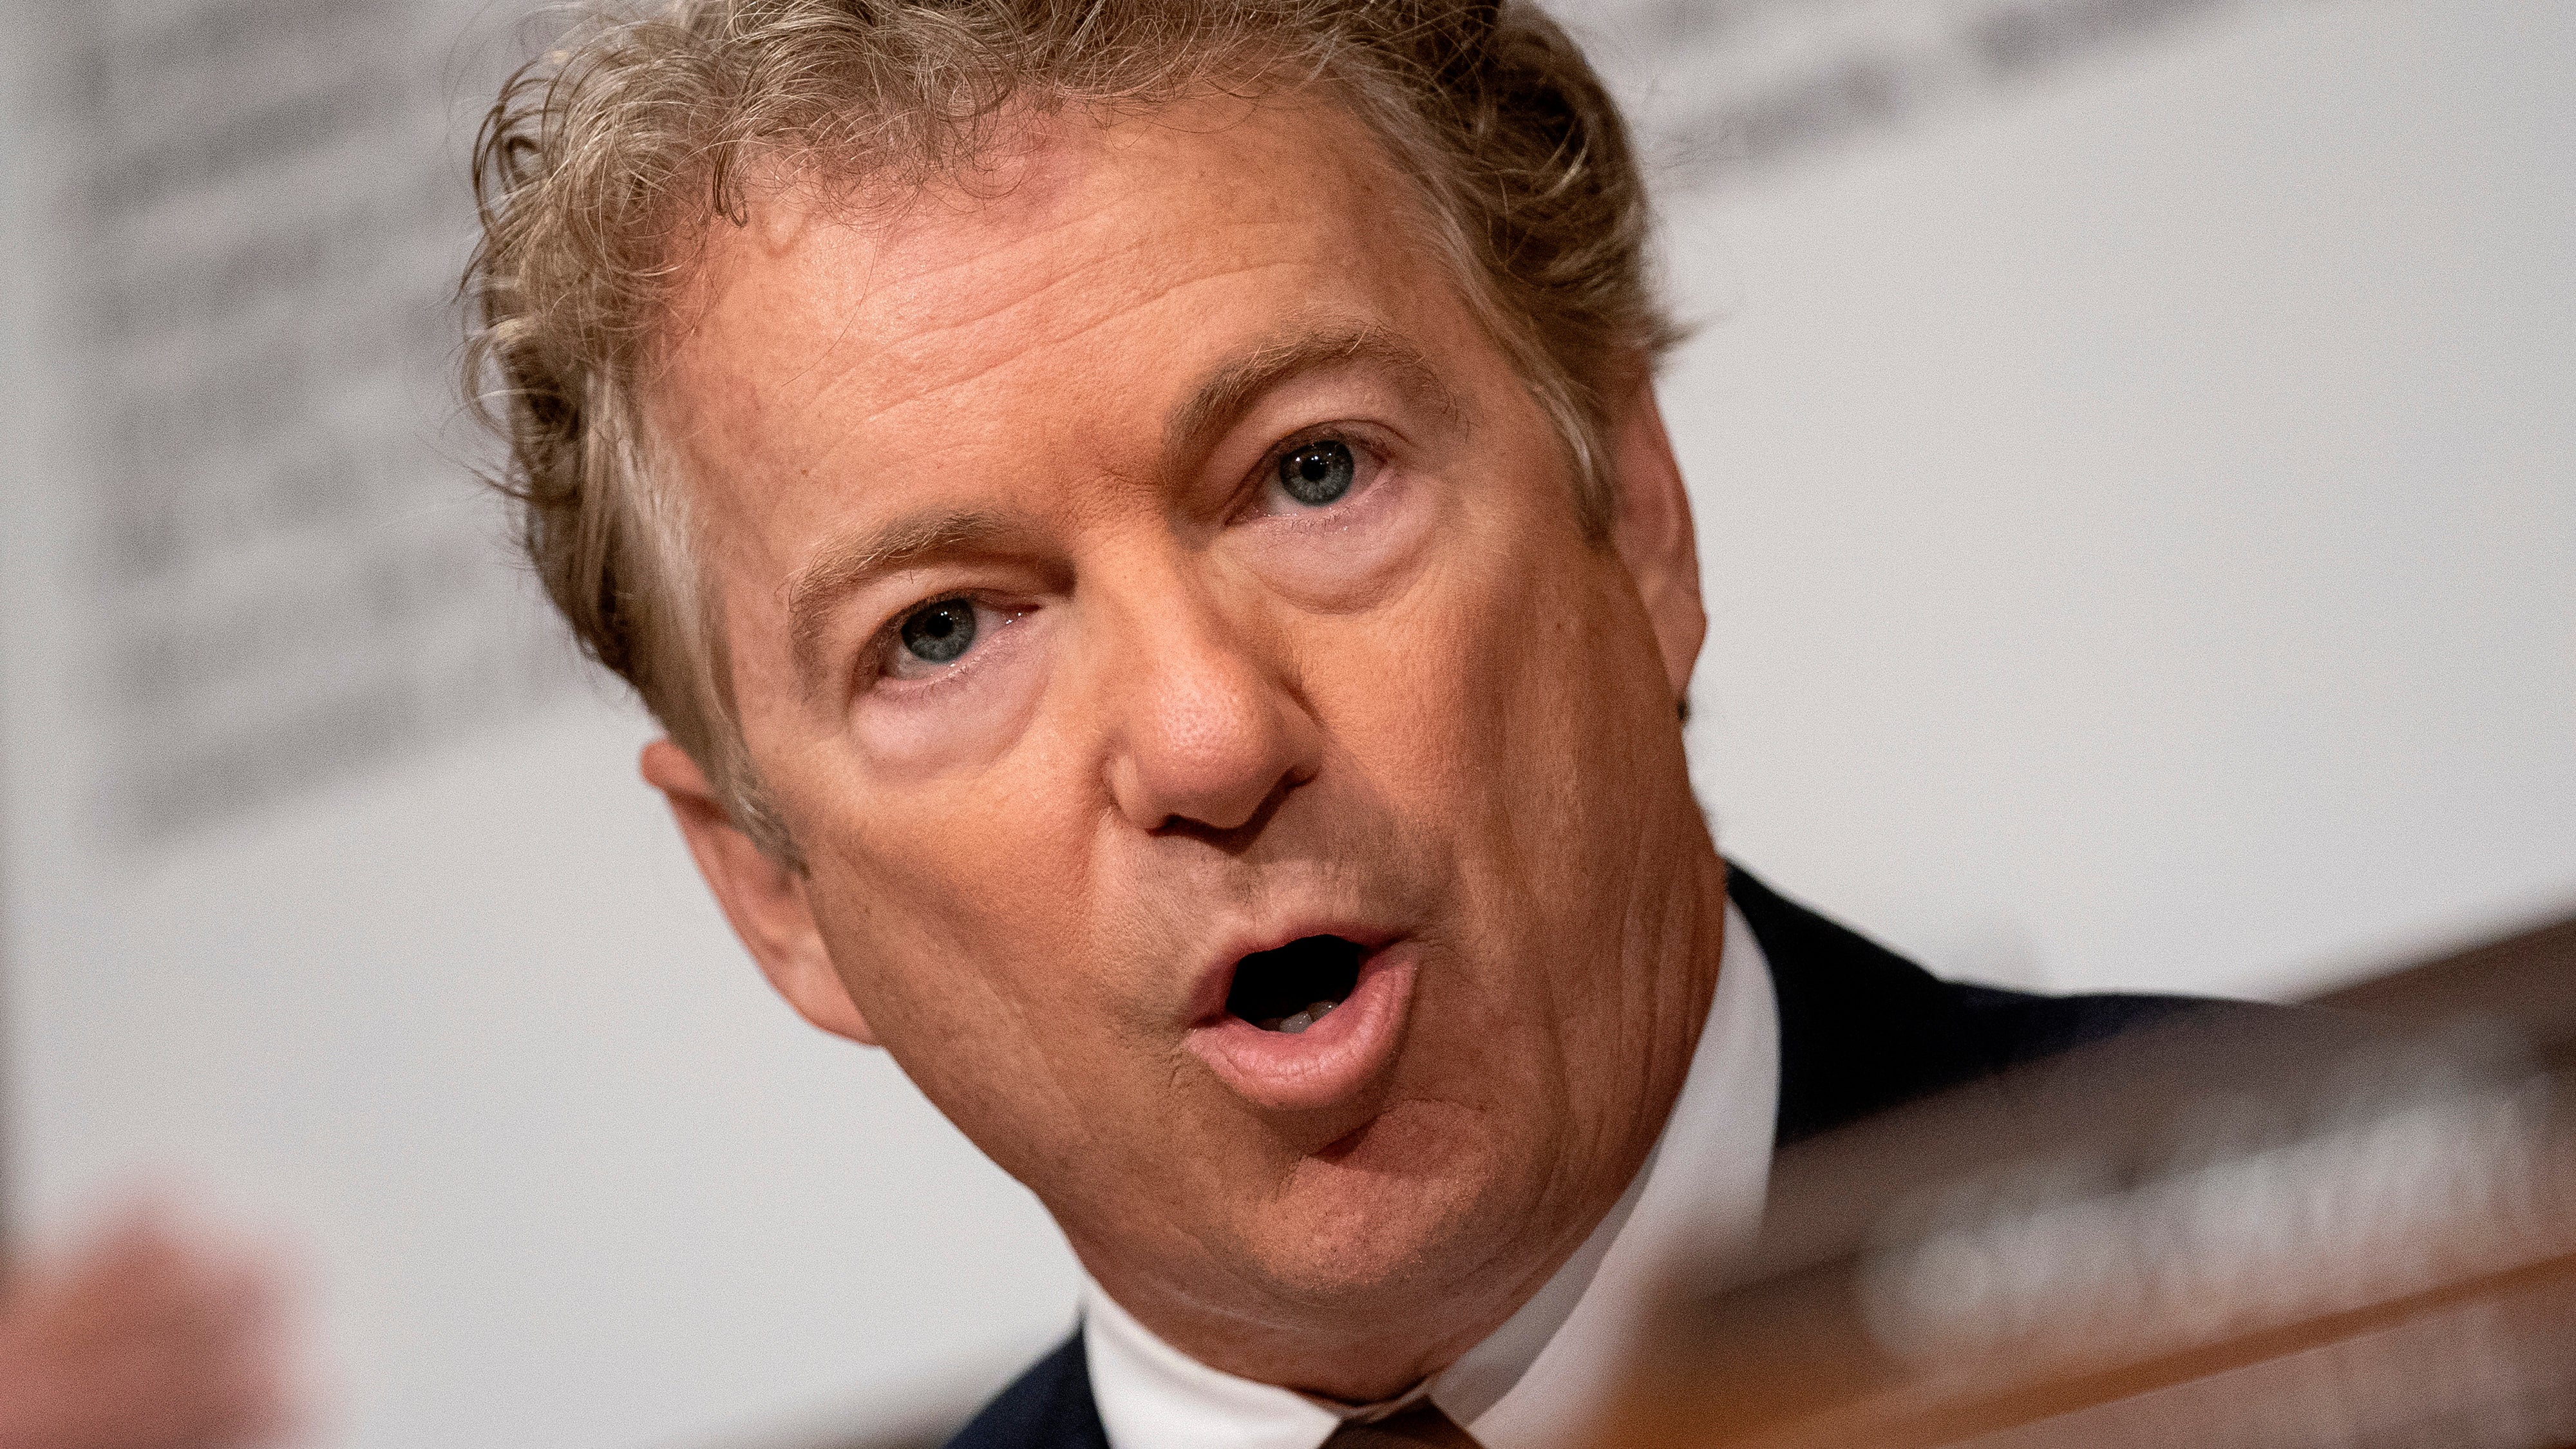 Trump raid could warrant AG Garland's impeachment, Rand Paul says: 'This is beyond the pale'